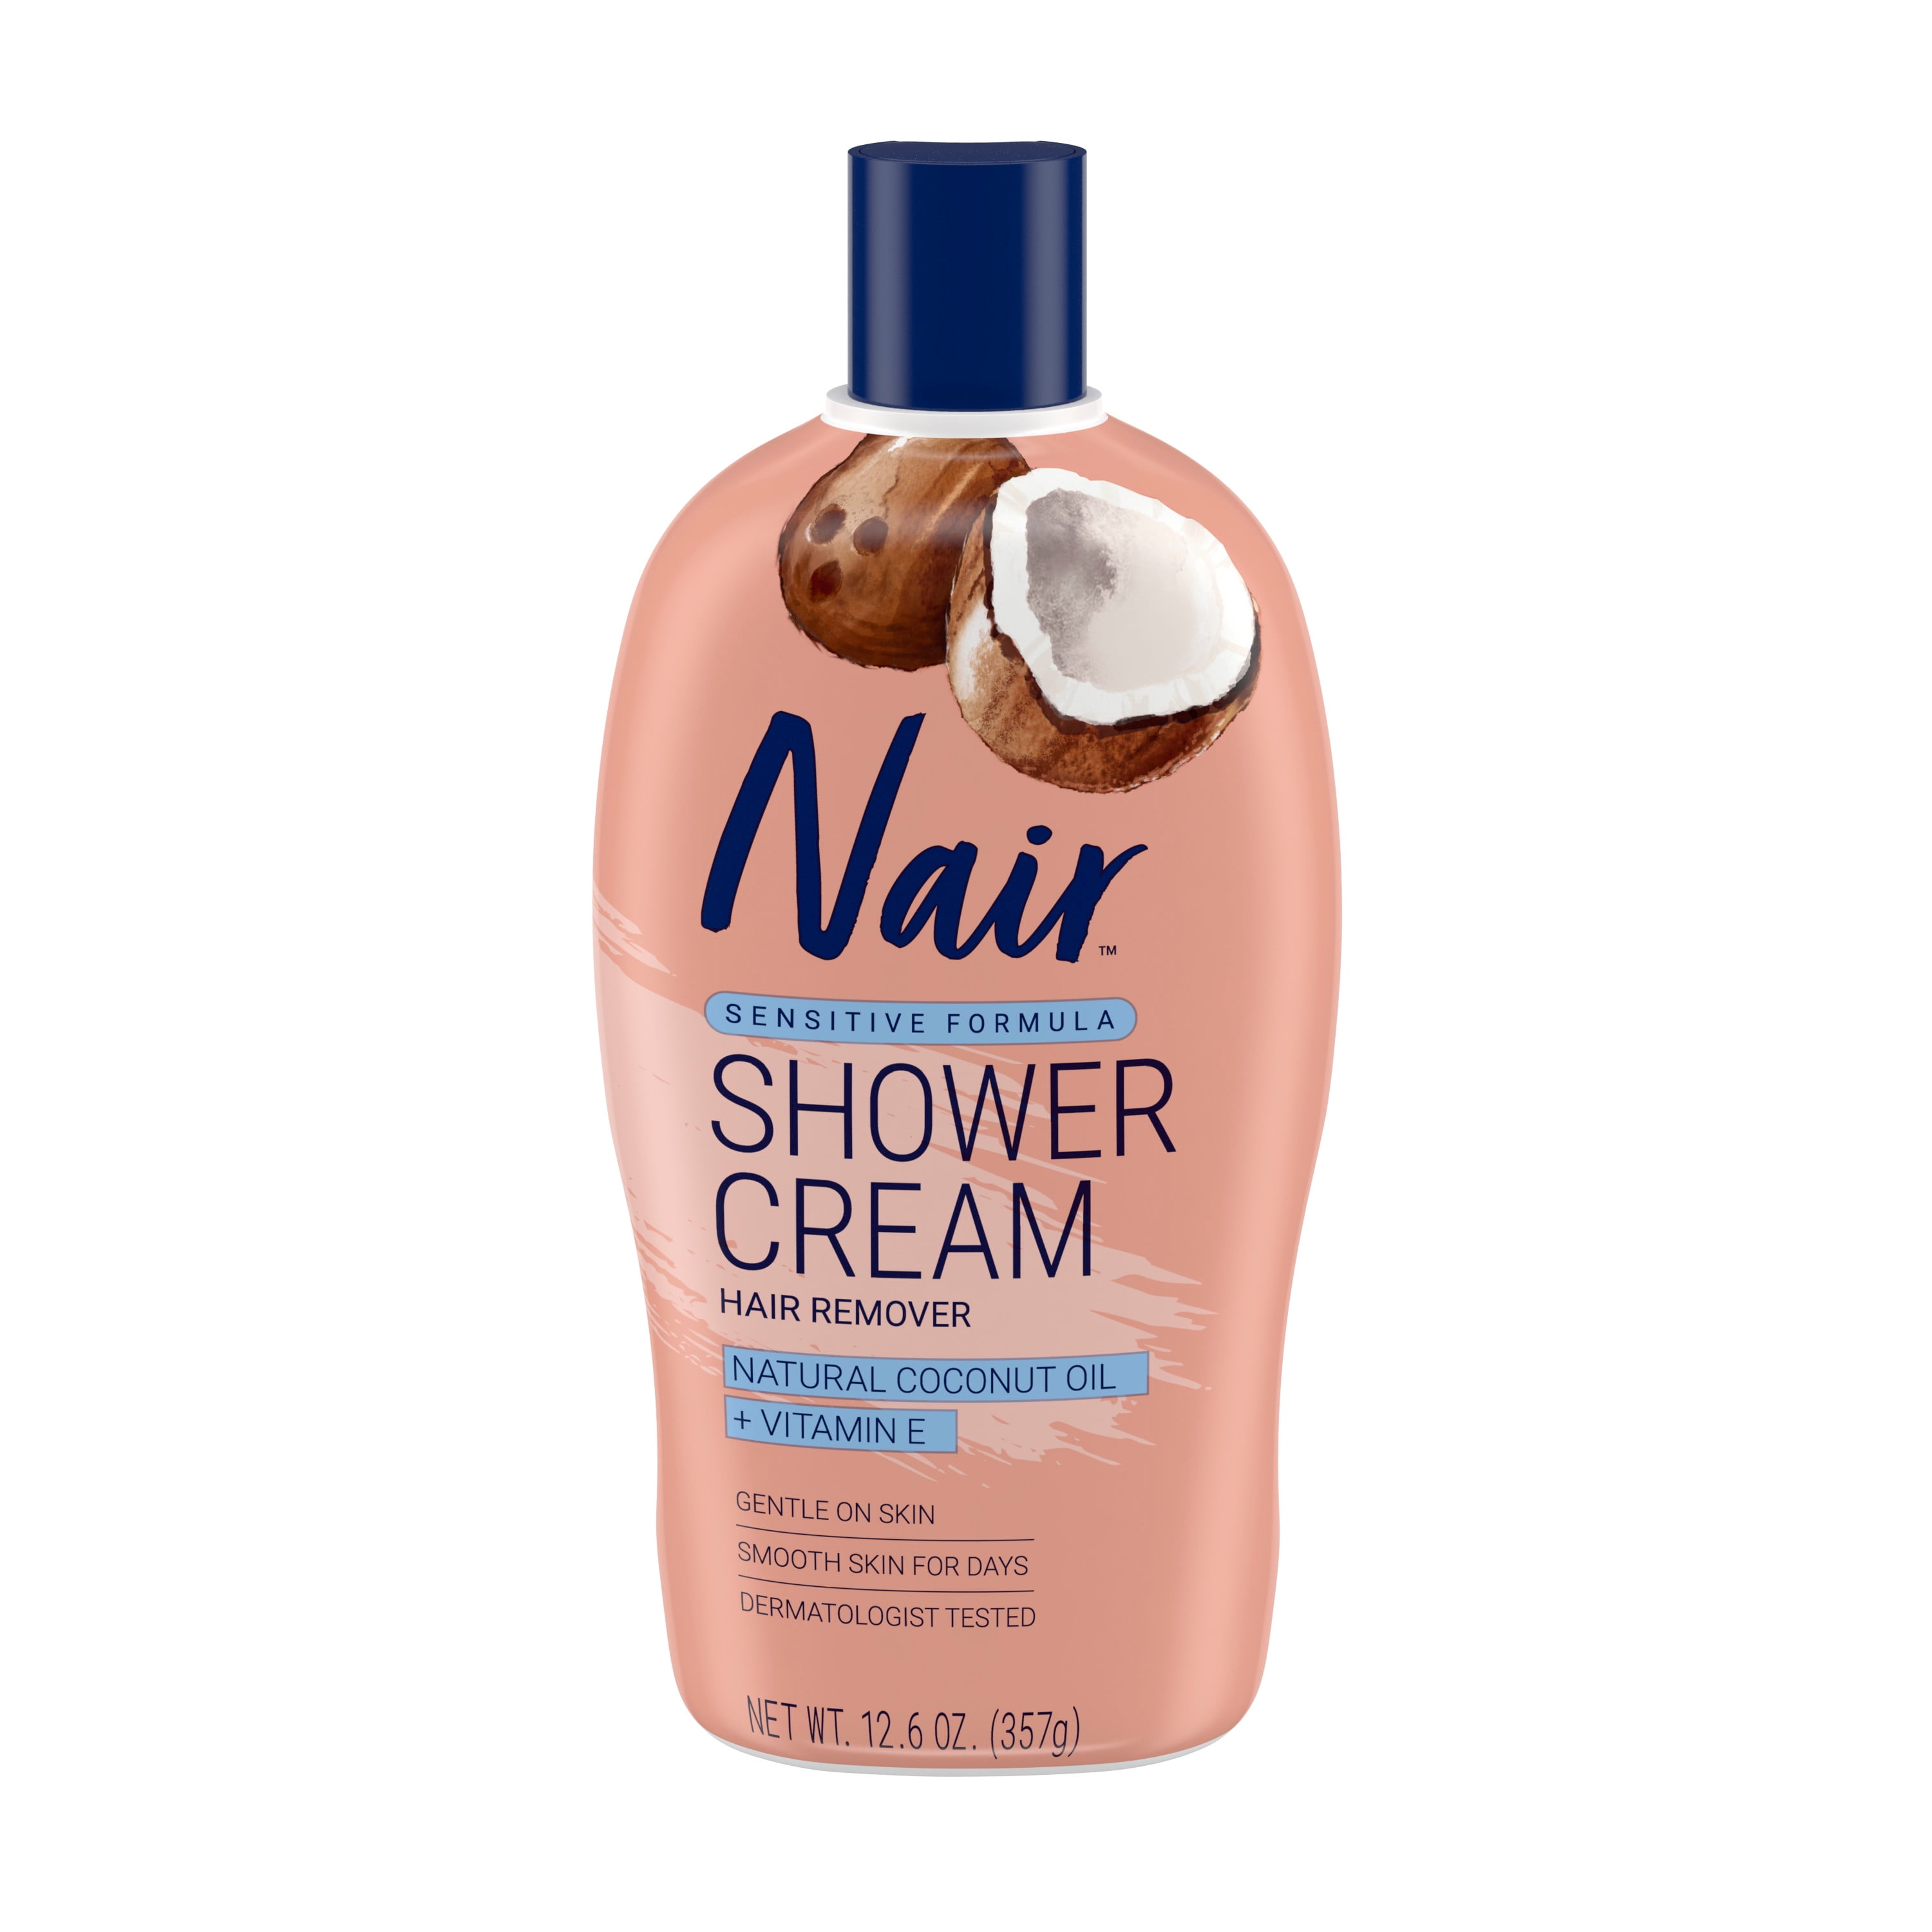 Nair Sensitive Formula Shower Cream Hair Remover with Coconut Oil and  Vitamin E,  